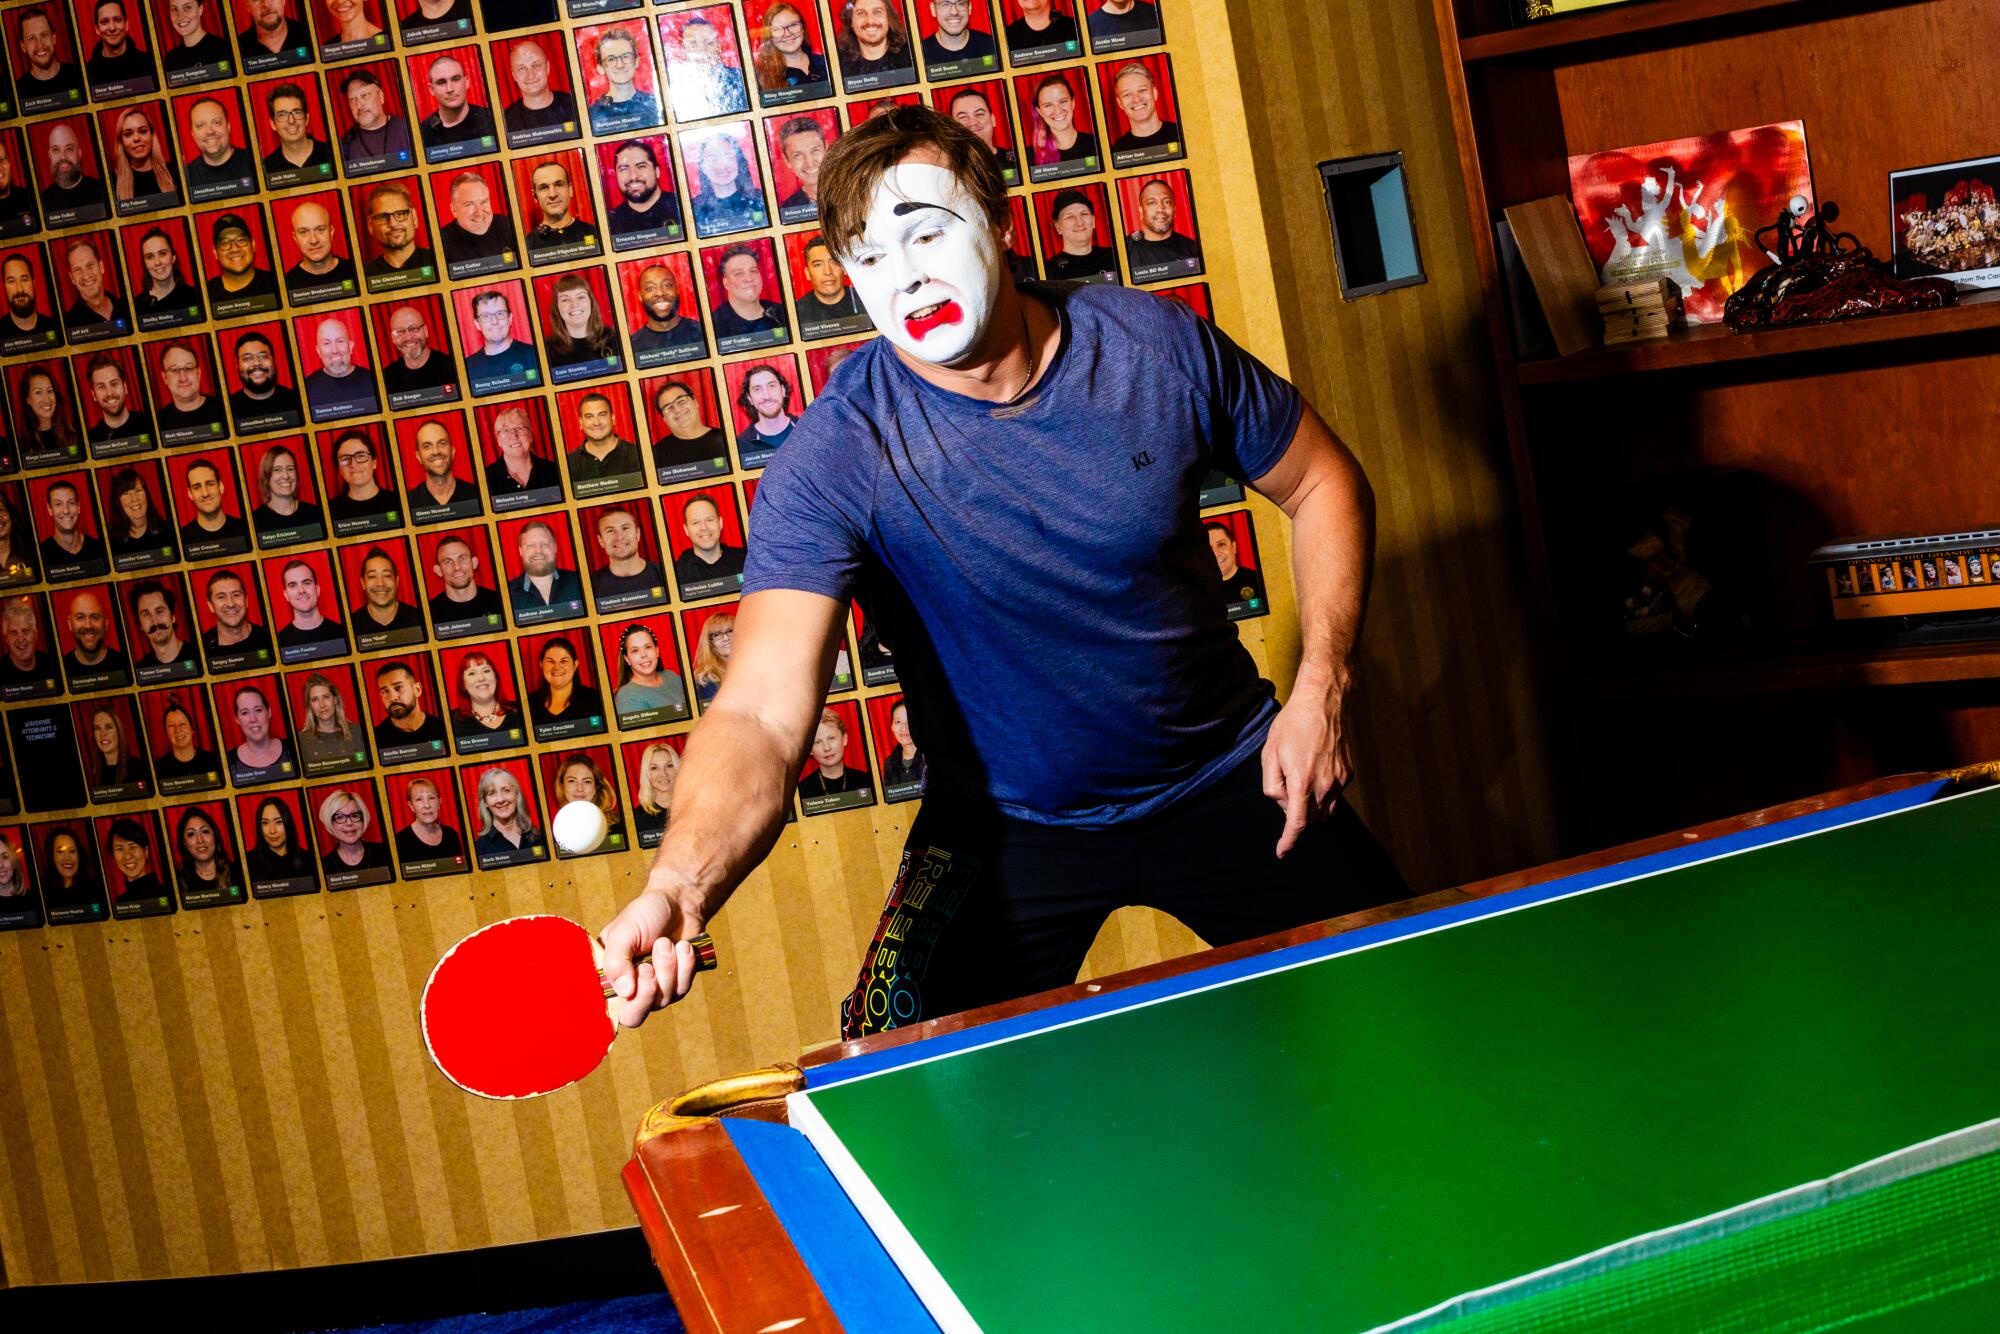 A man in clown makeup plays ping-pong backstage.